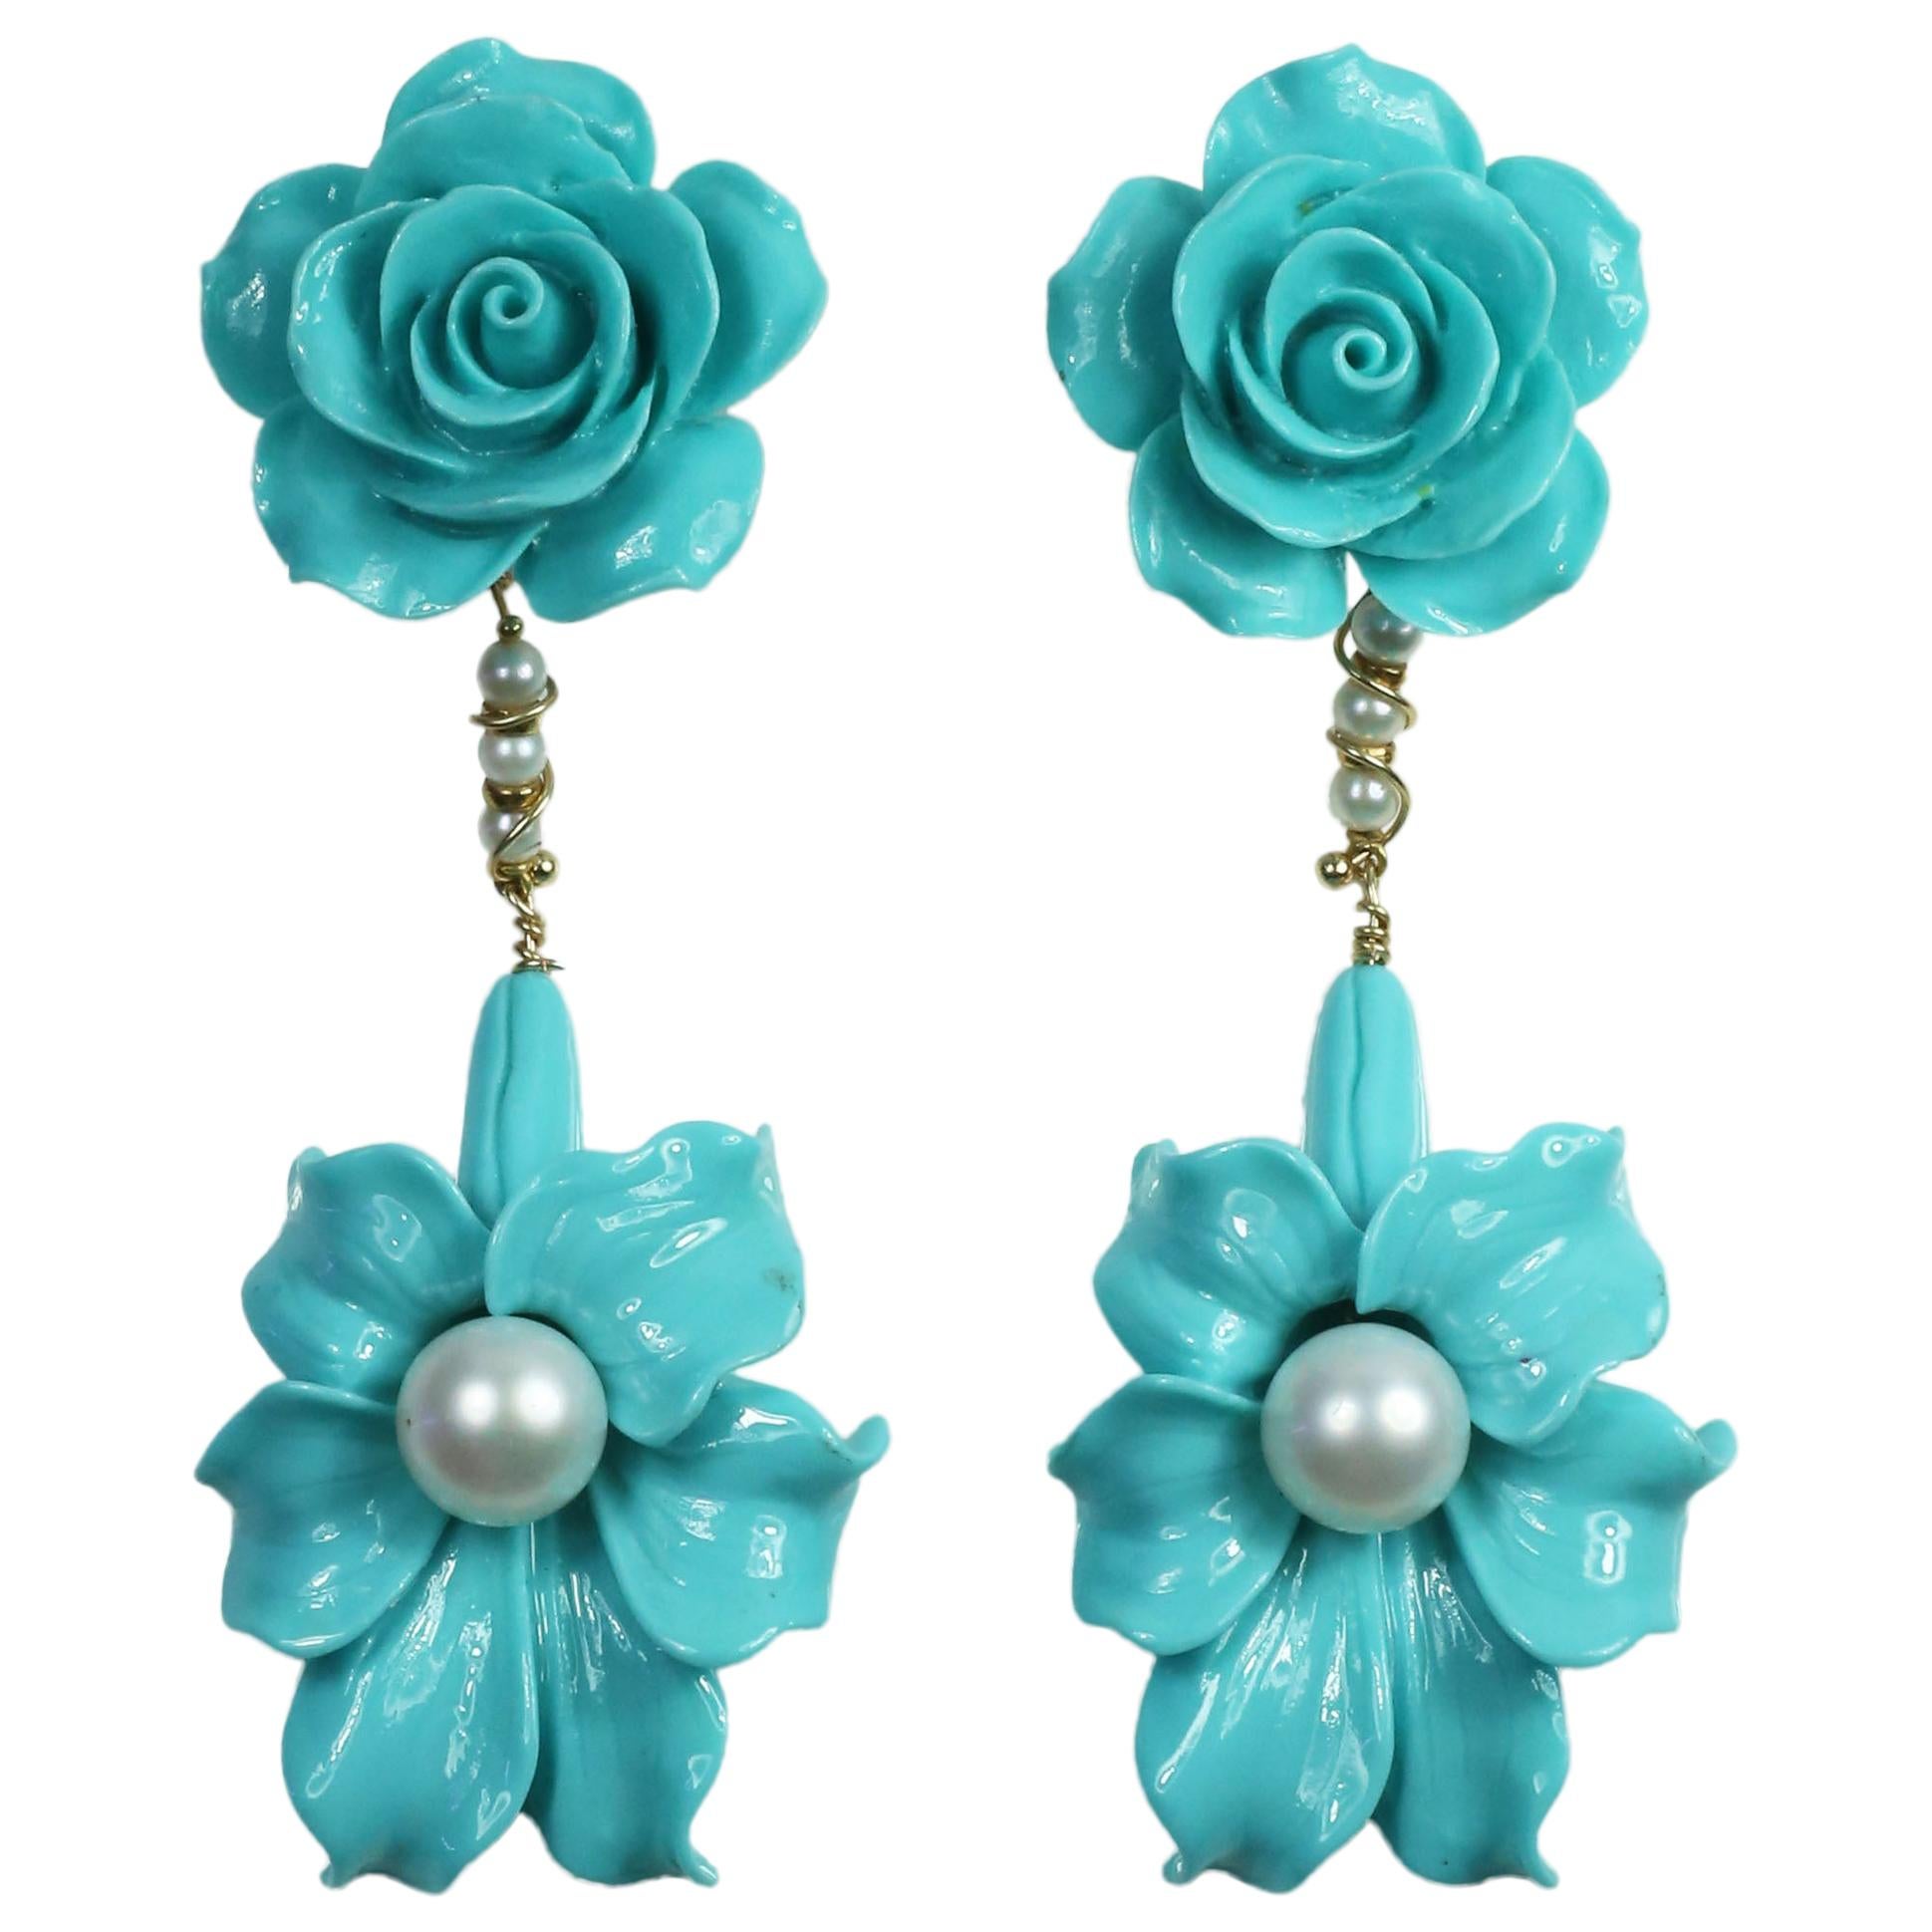 Begonia Flower Collection in Silver and Colored Stones Earrings